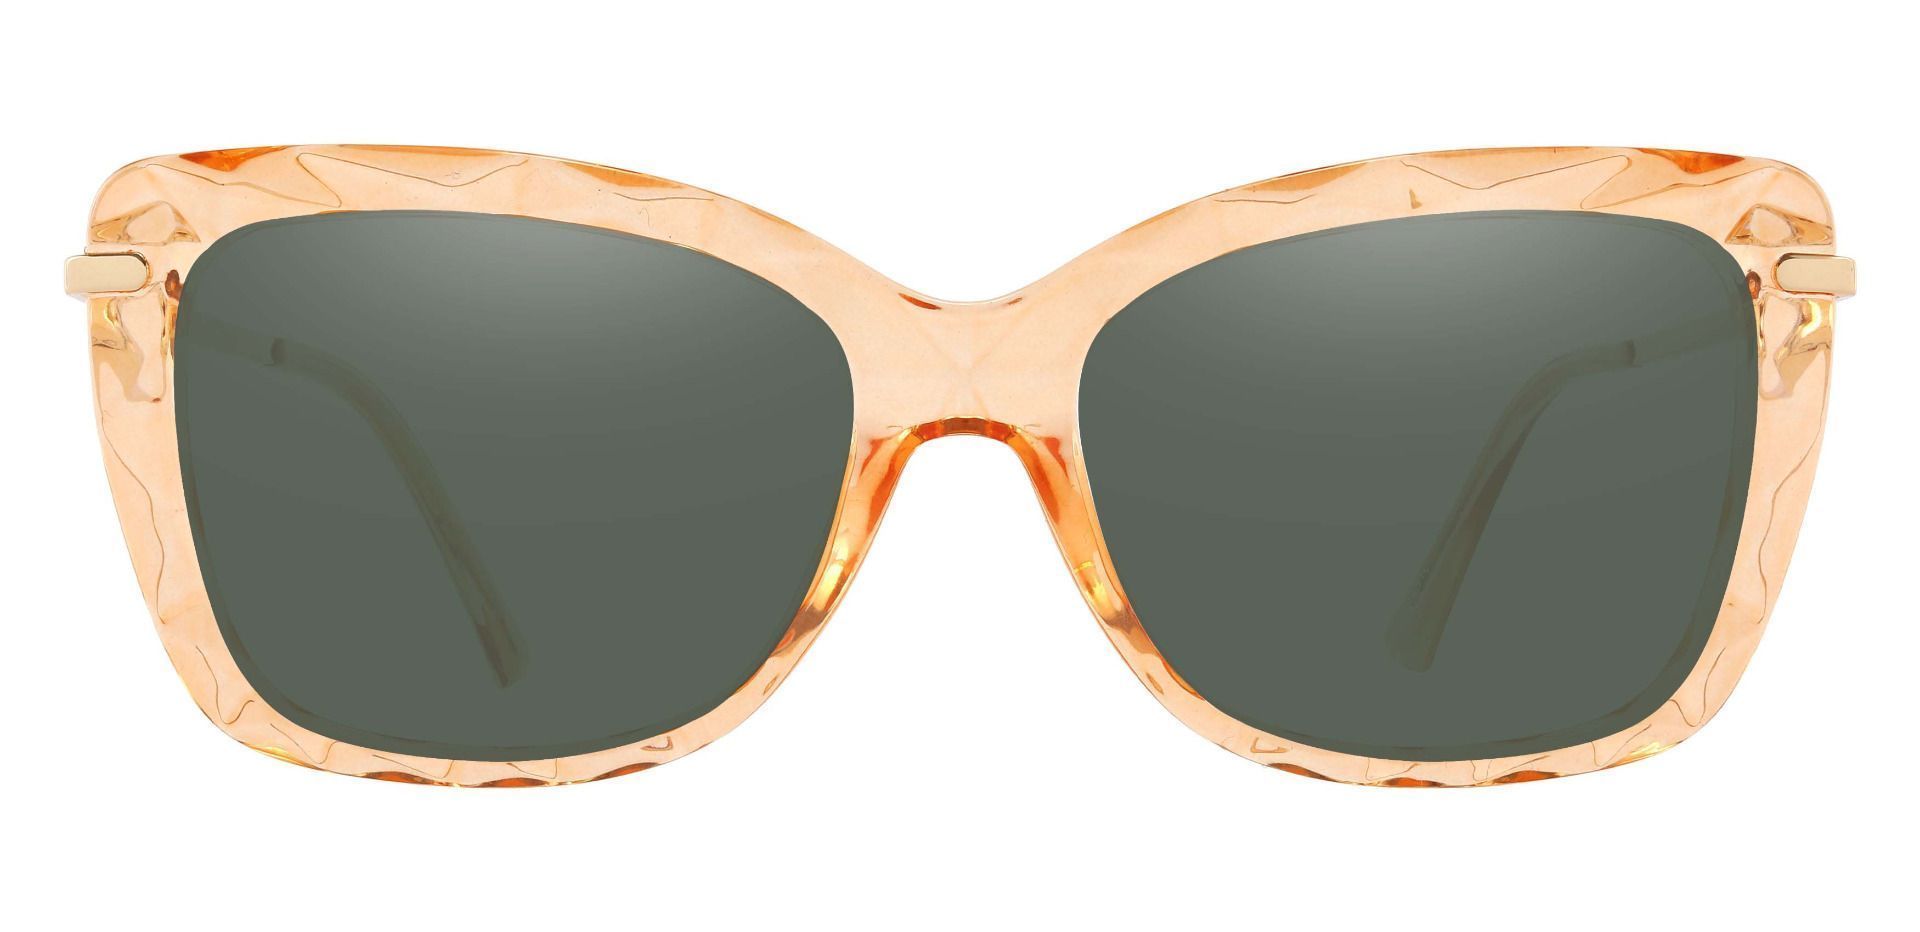 Shoshanna Rectangle Non-Rx Sunglasses - Brown Frame With Green Lenses